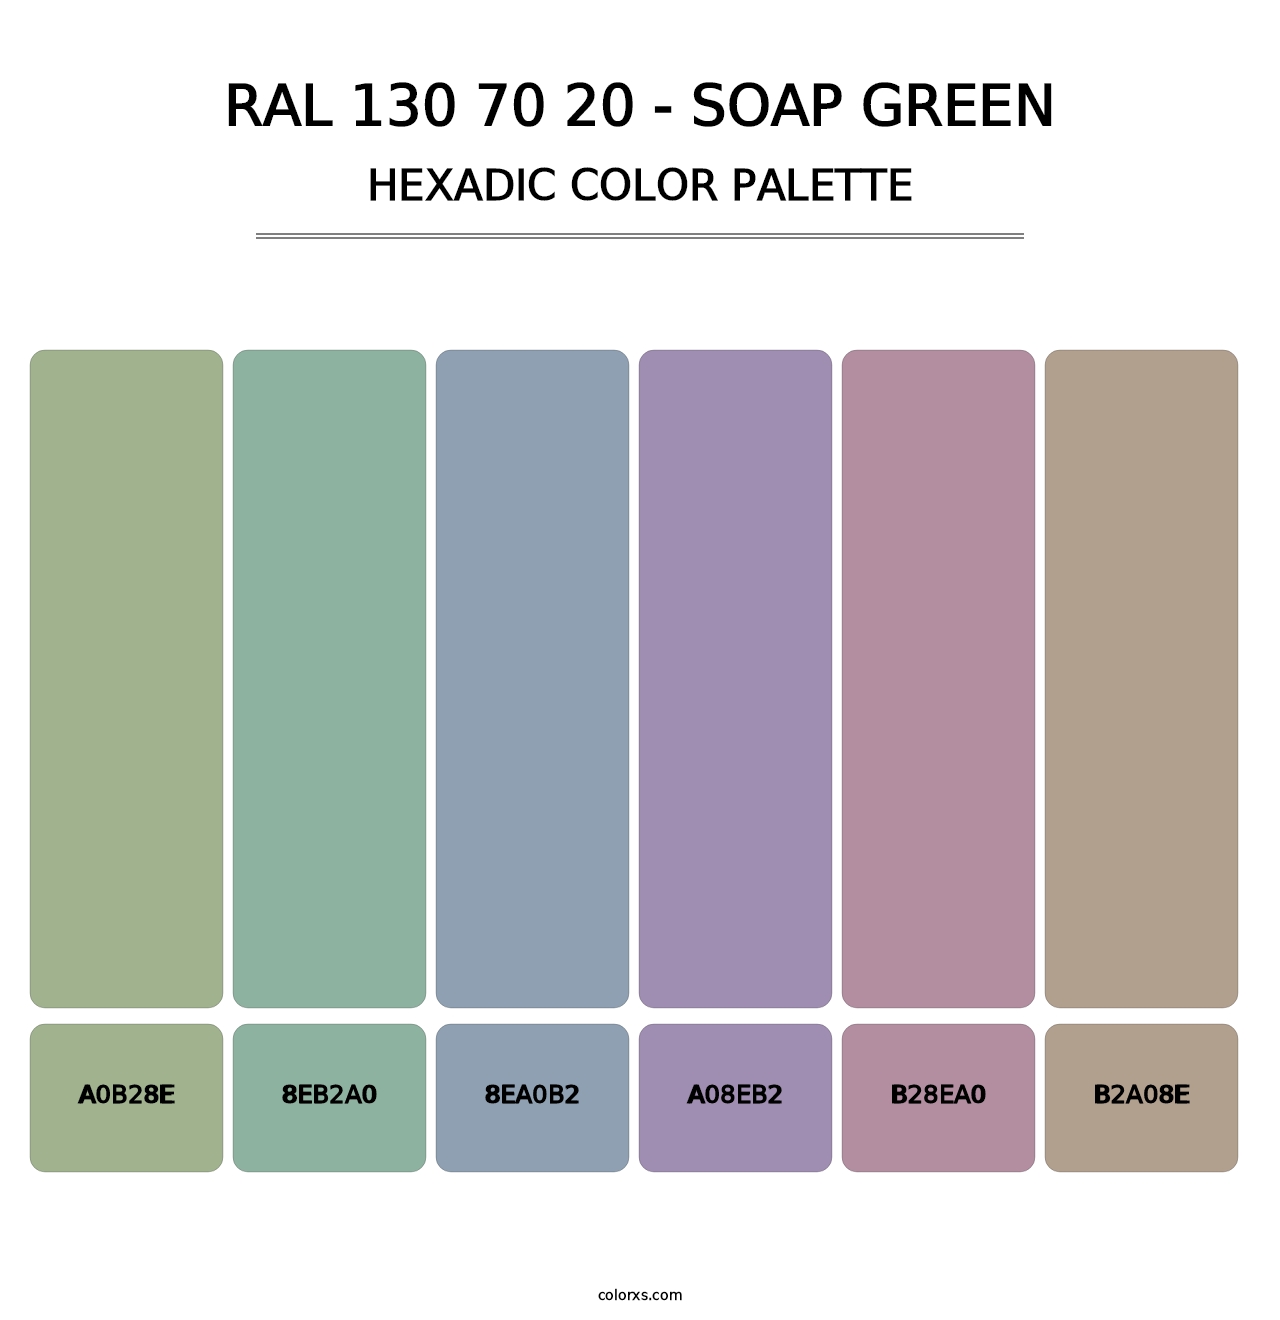 RAL 130 70 20 - Soap Green - Hexadic Color Palette